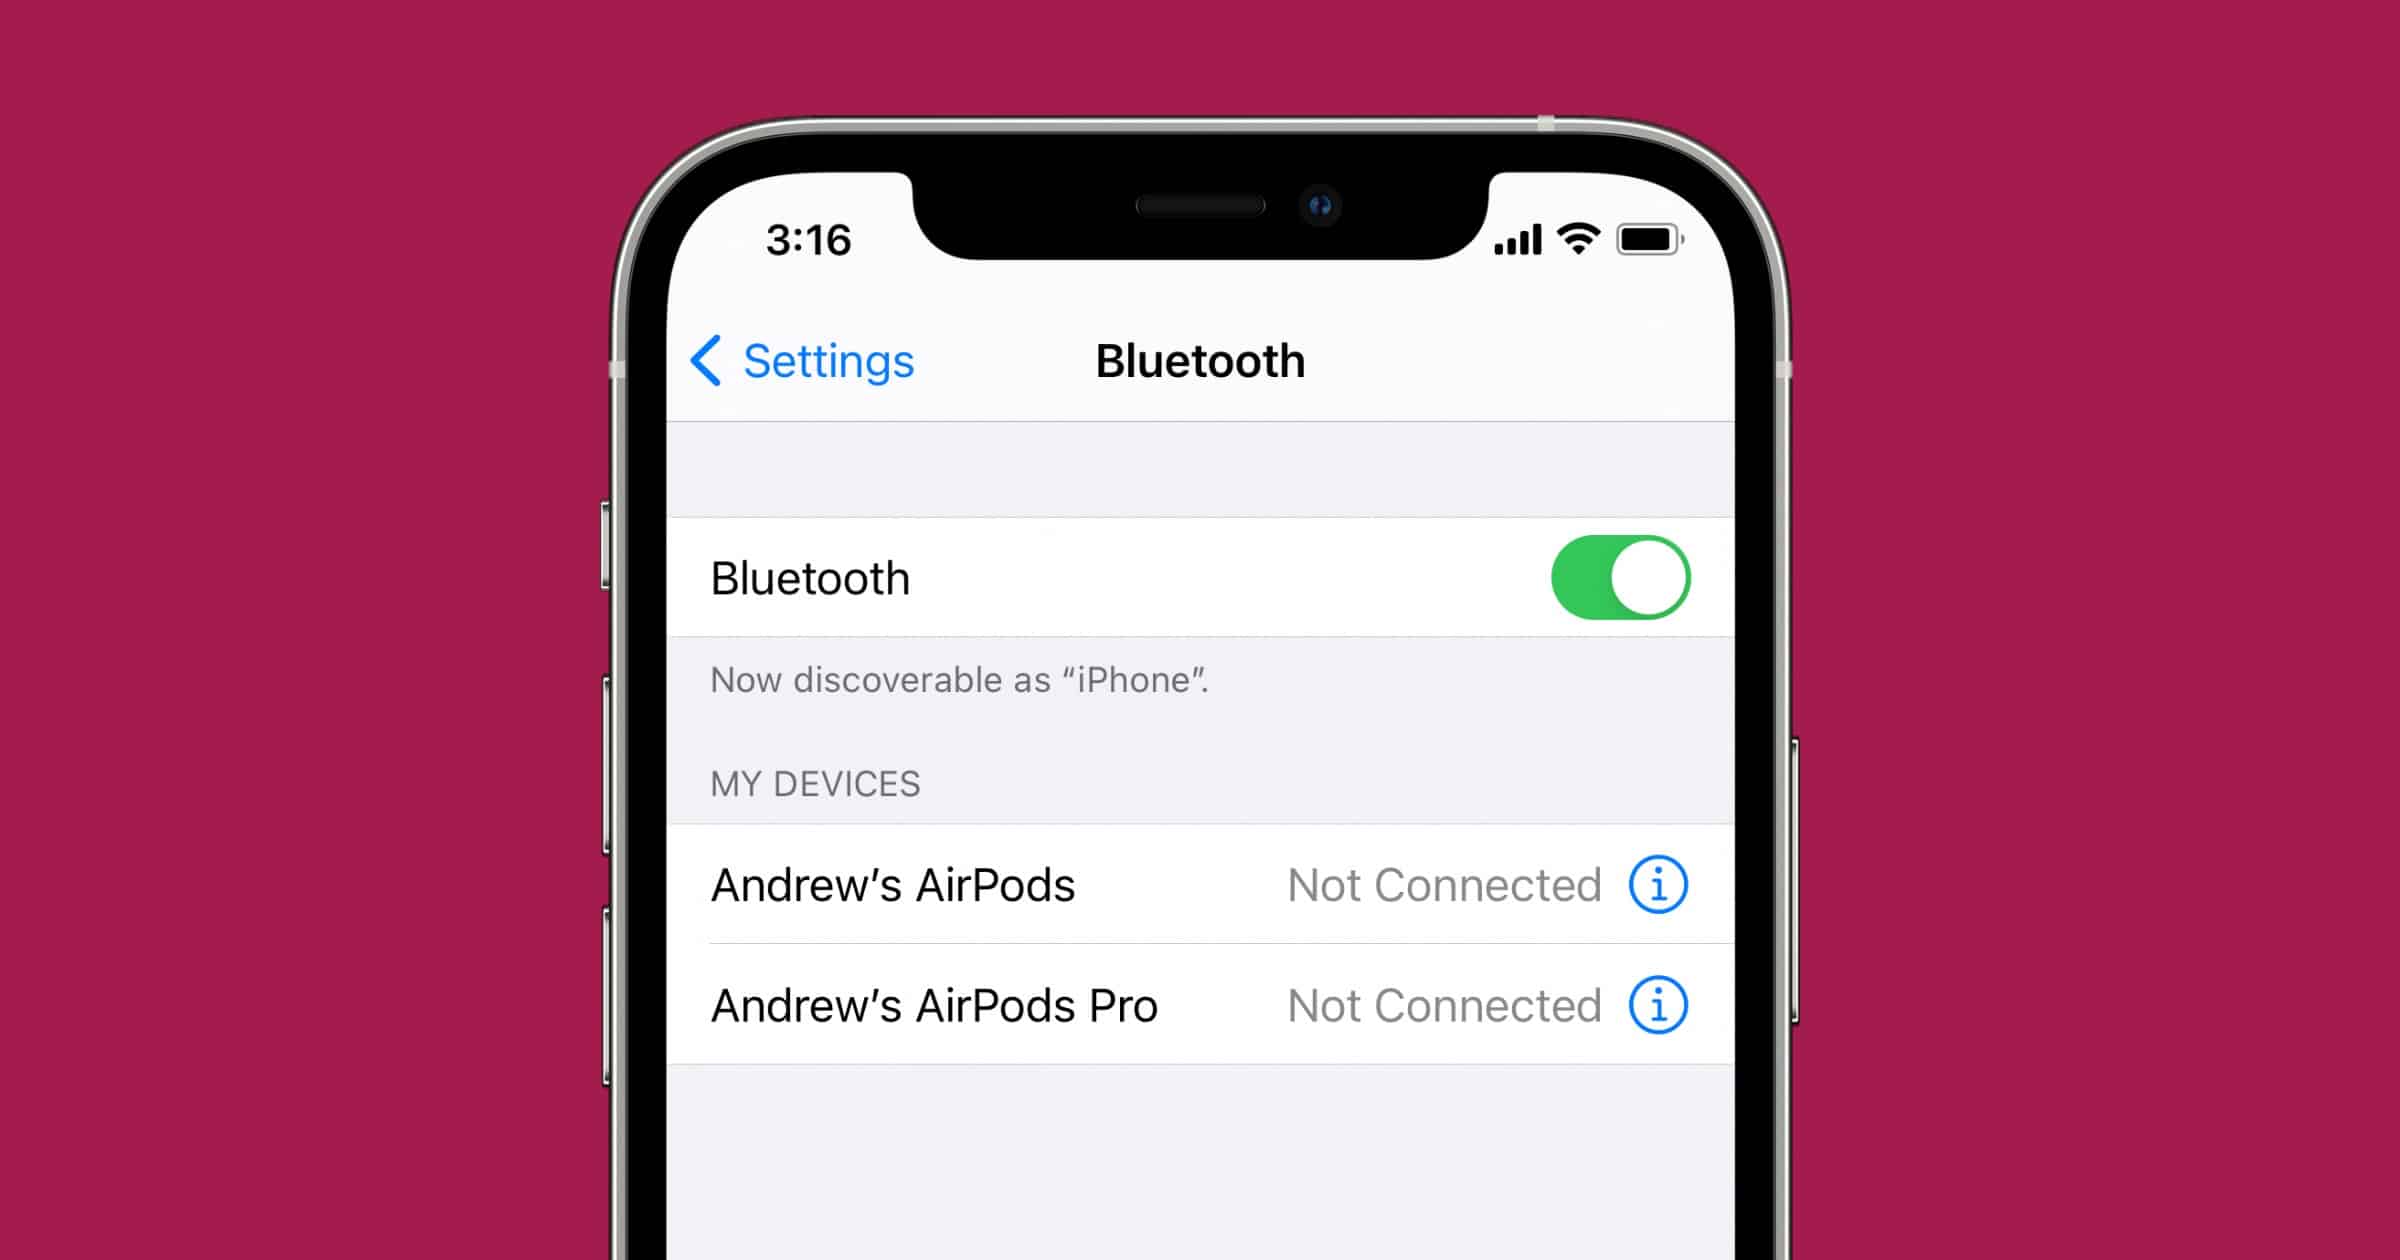 iOS: Set a Category for Bluetooth Devices to Get the Best Experience